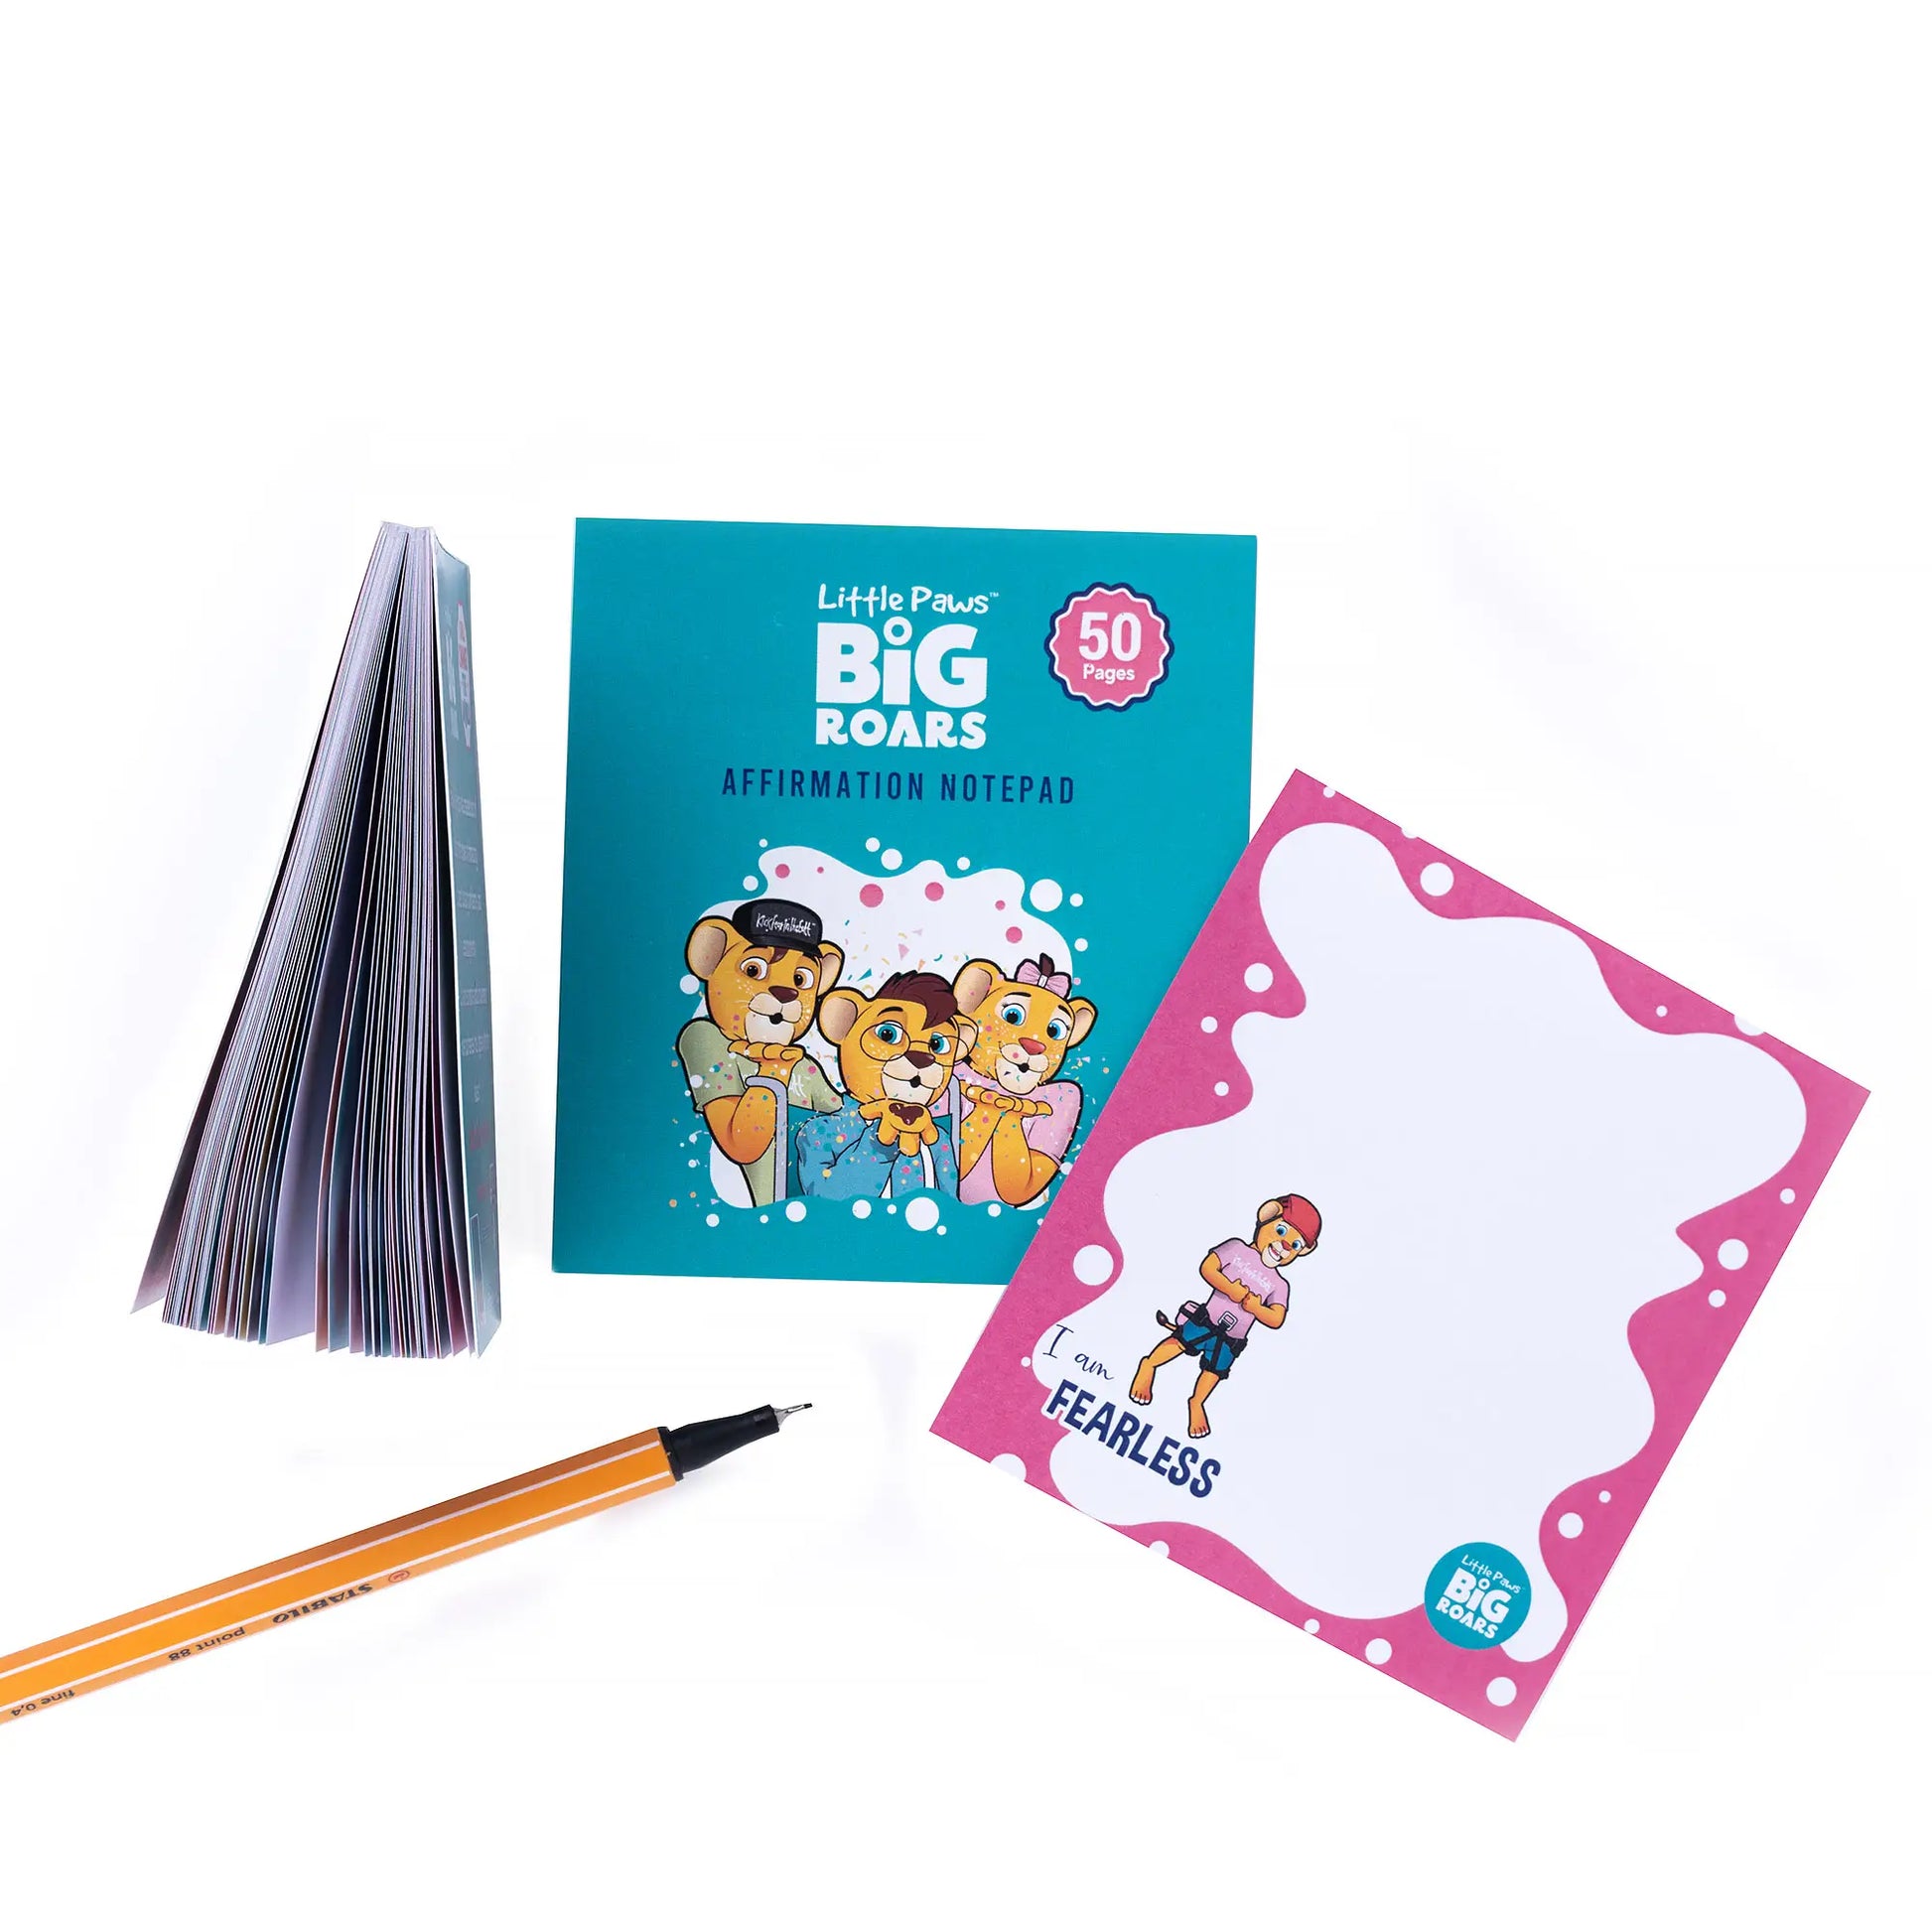 Little Paws, Big Roars; Affirmation notepads for kids